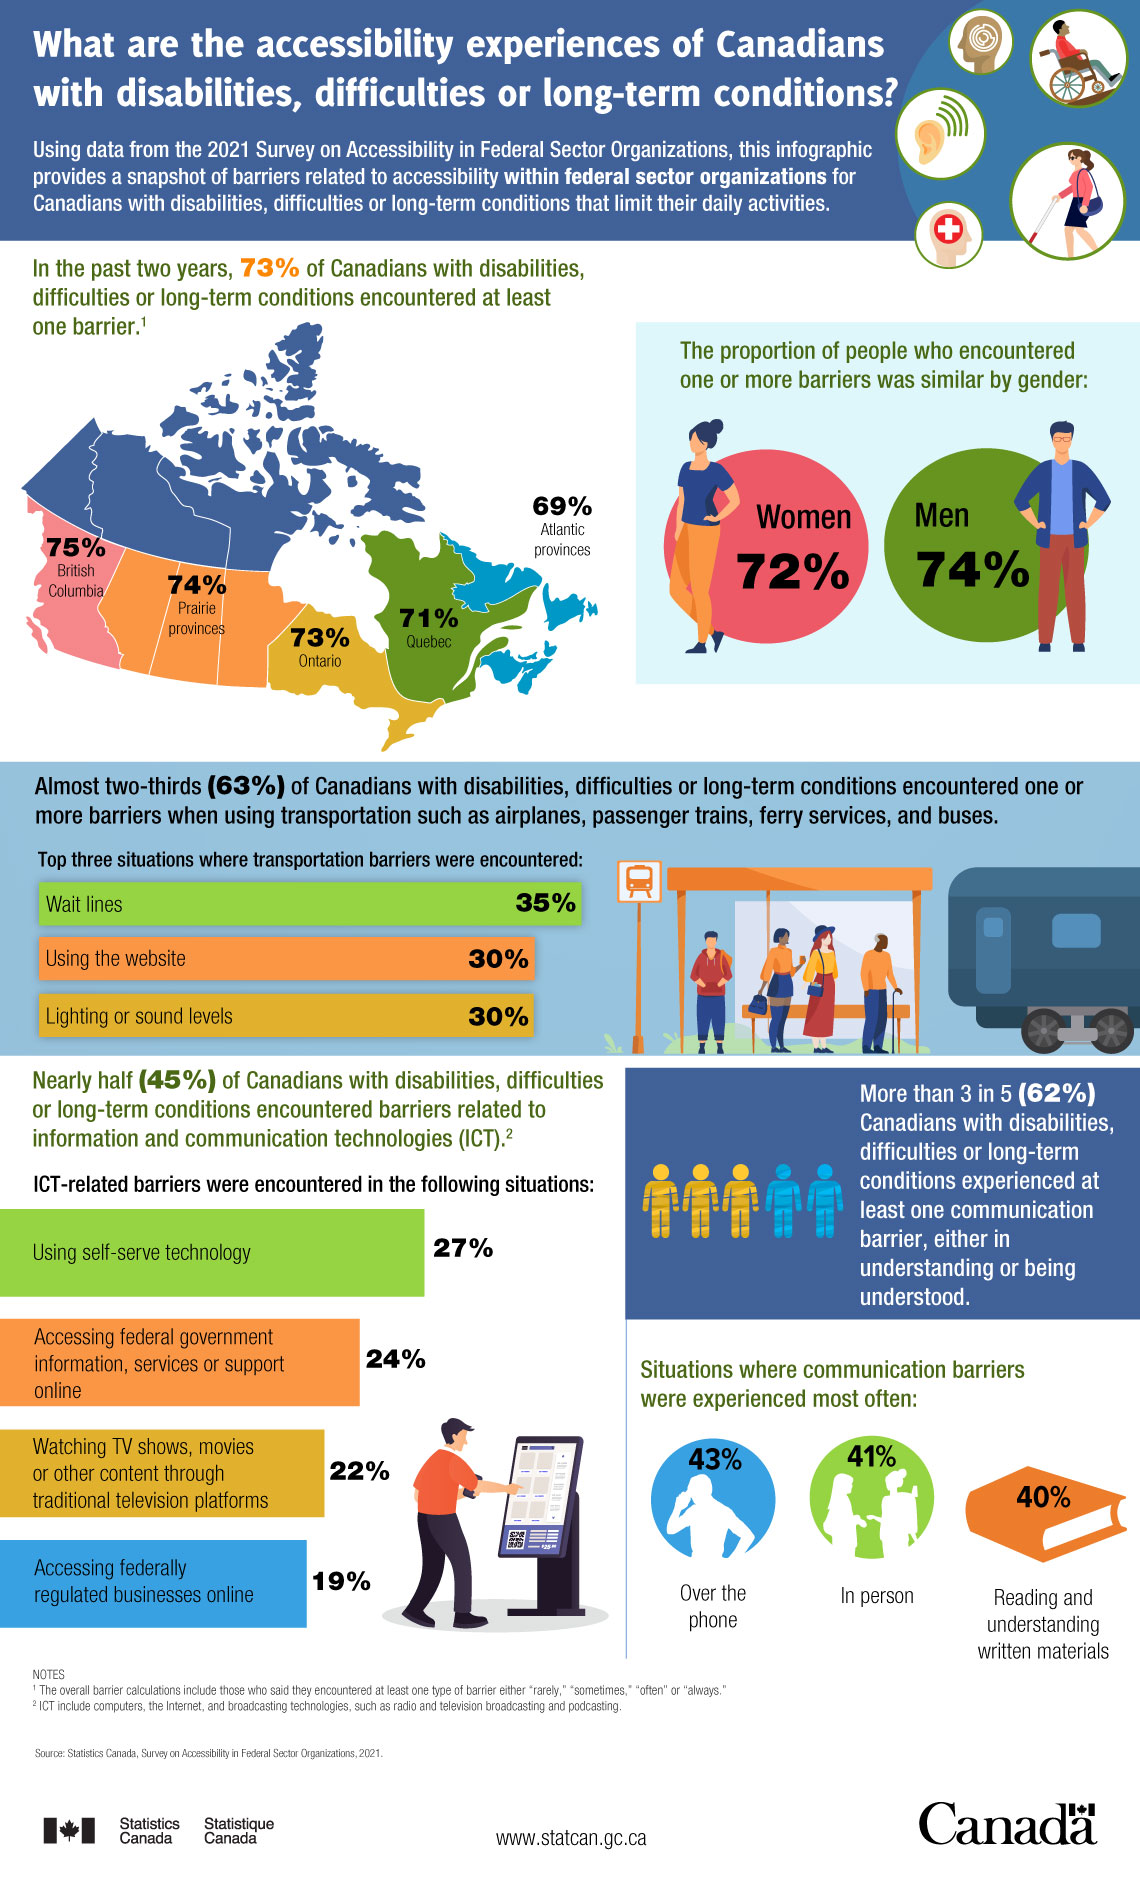 Infographic: What are the accessibility experiences of Canadians with disabilities, difficulties or long-term conditions?